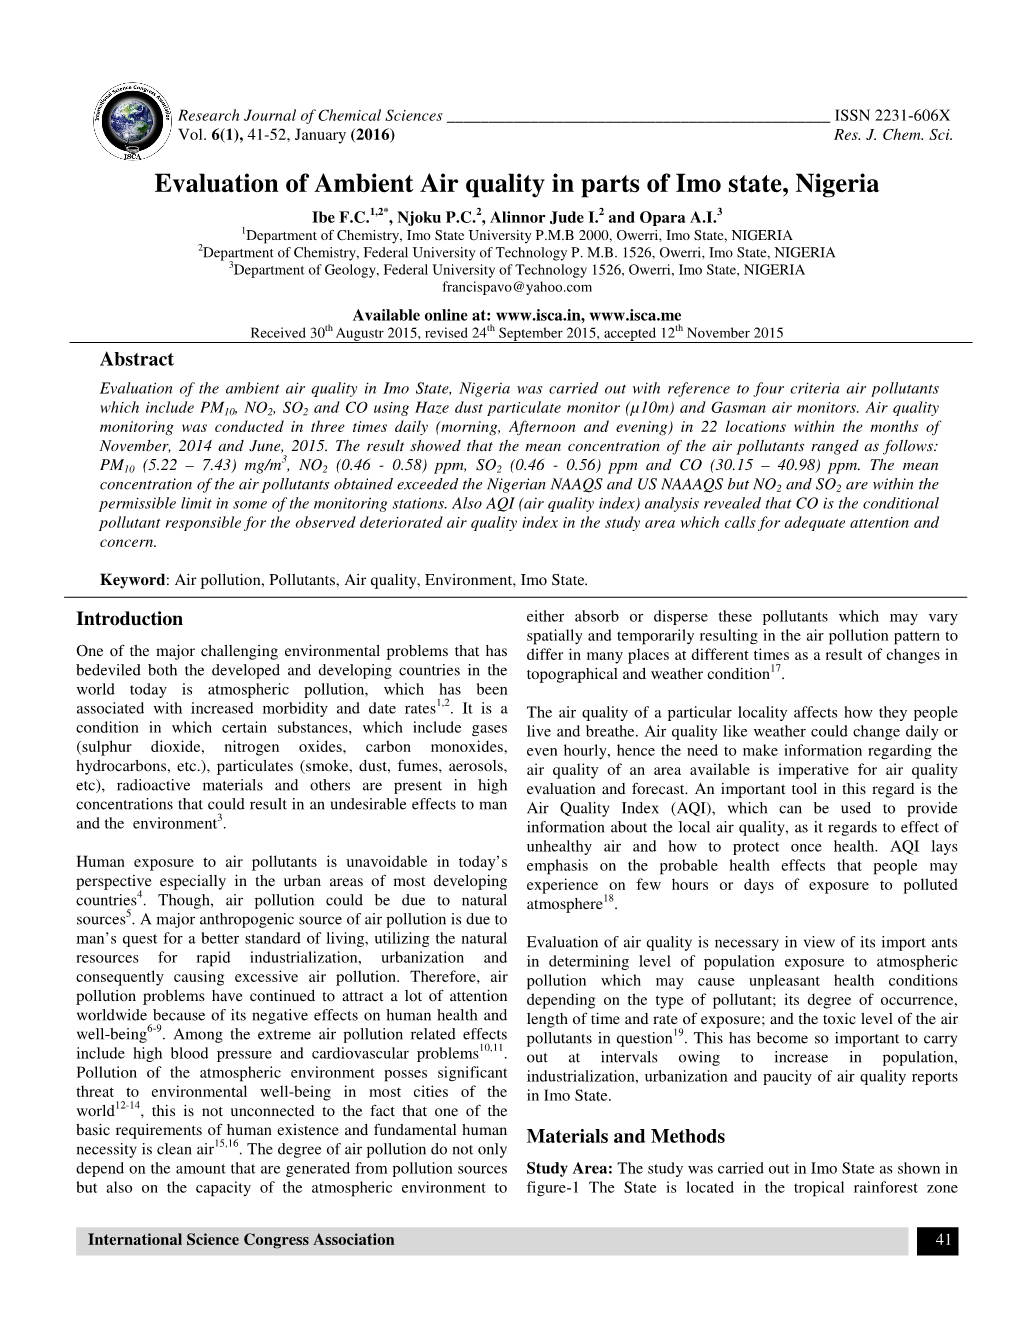 Evaluation of Ambient Air Quality in Parts of Imo State, Nigeria